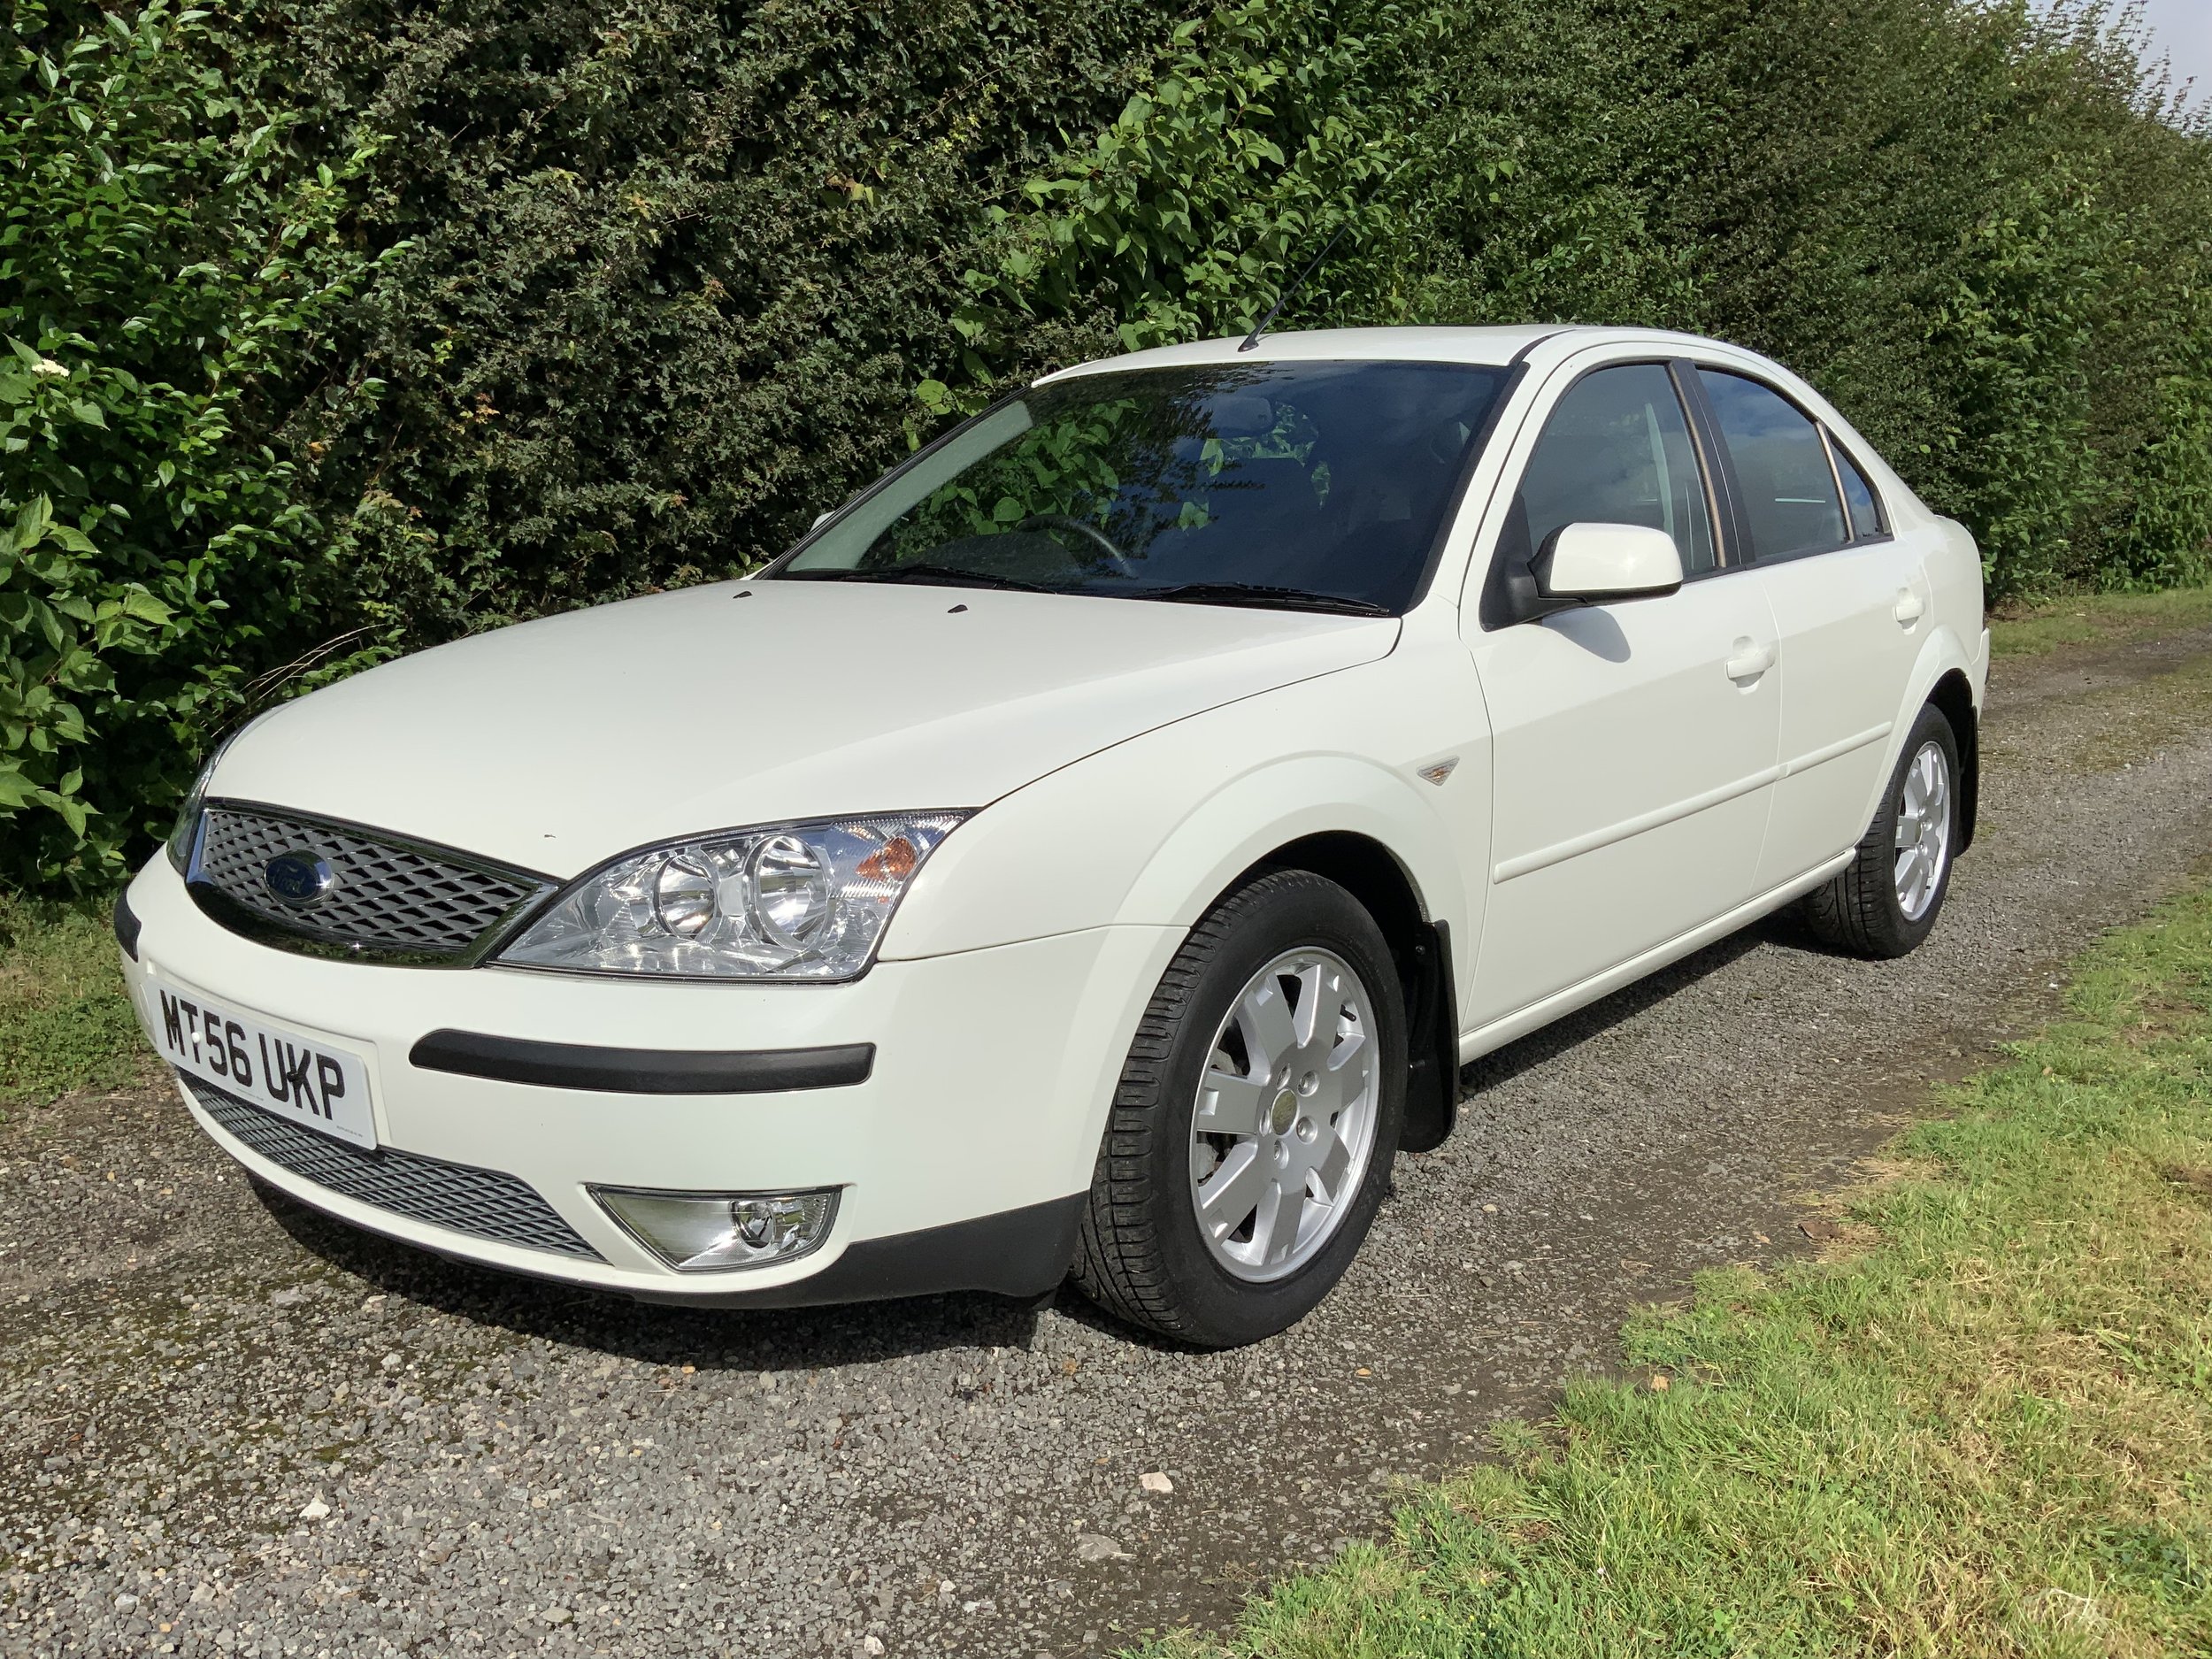 Ford Mondeo Zetec only 3,965 miles